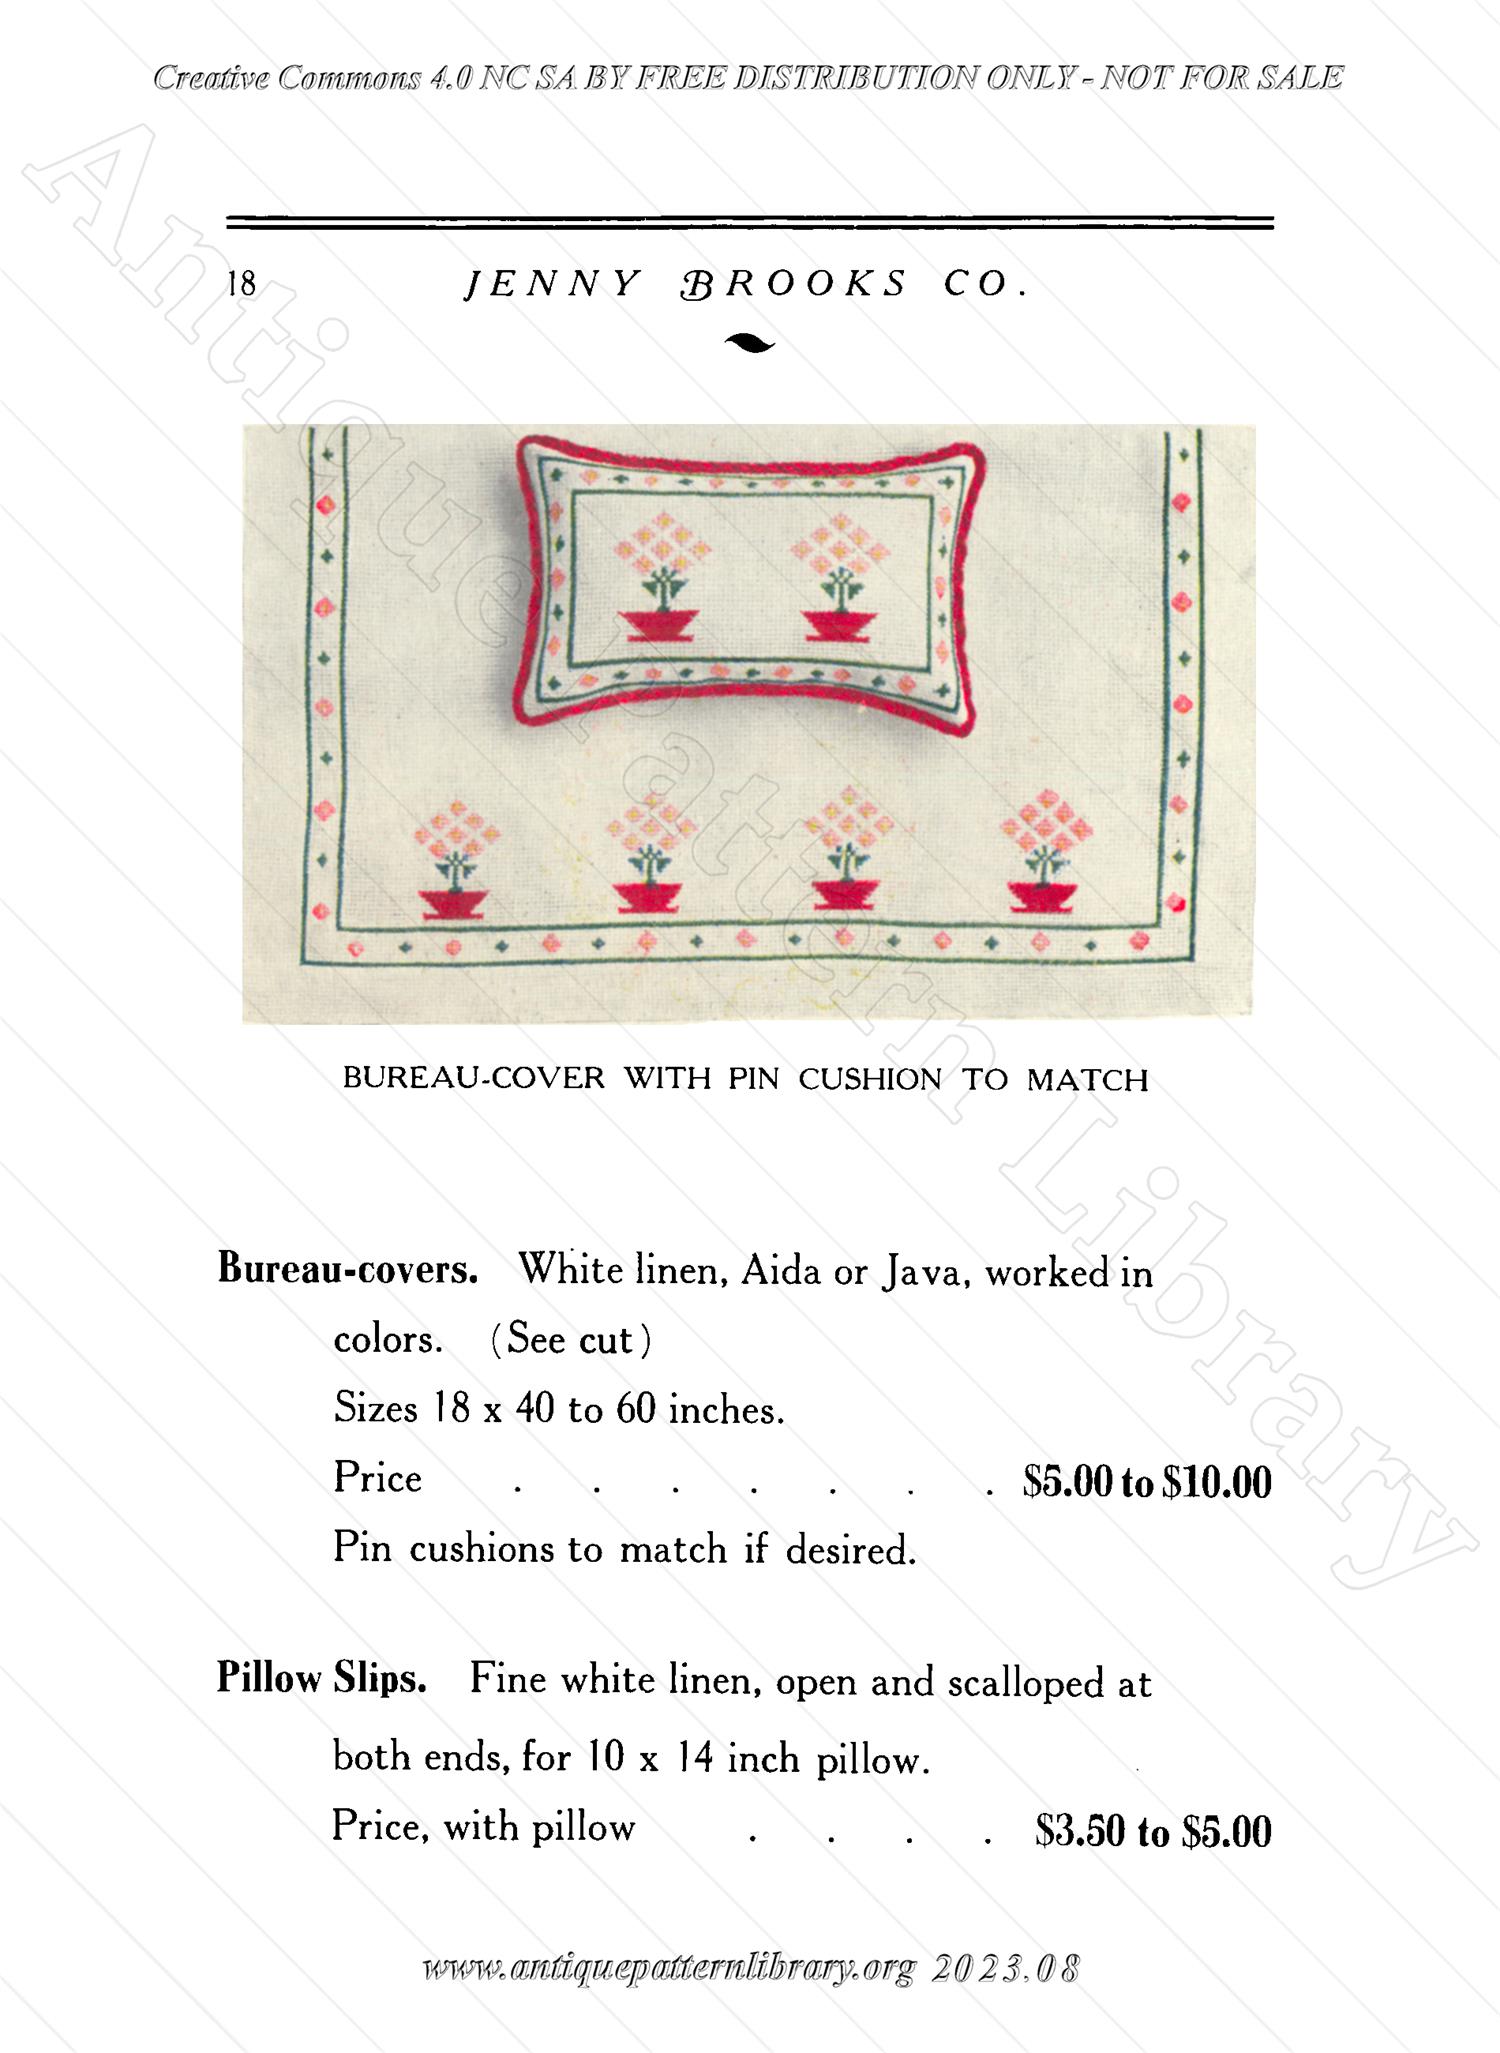 N-LP002 Original Designs for Embroidery and Cross-Stitch Patterns